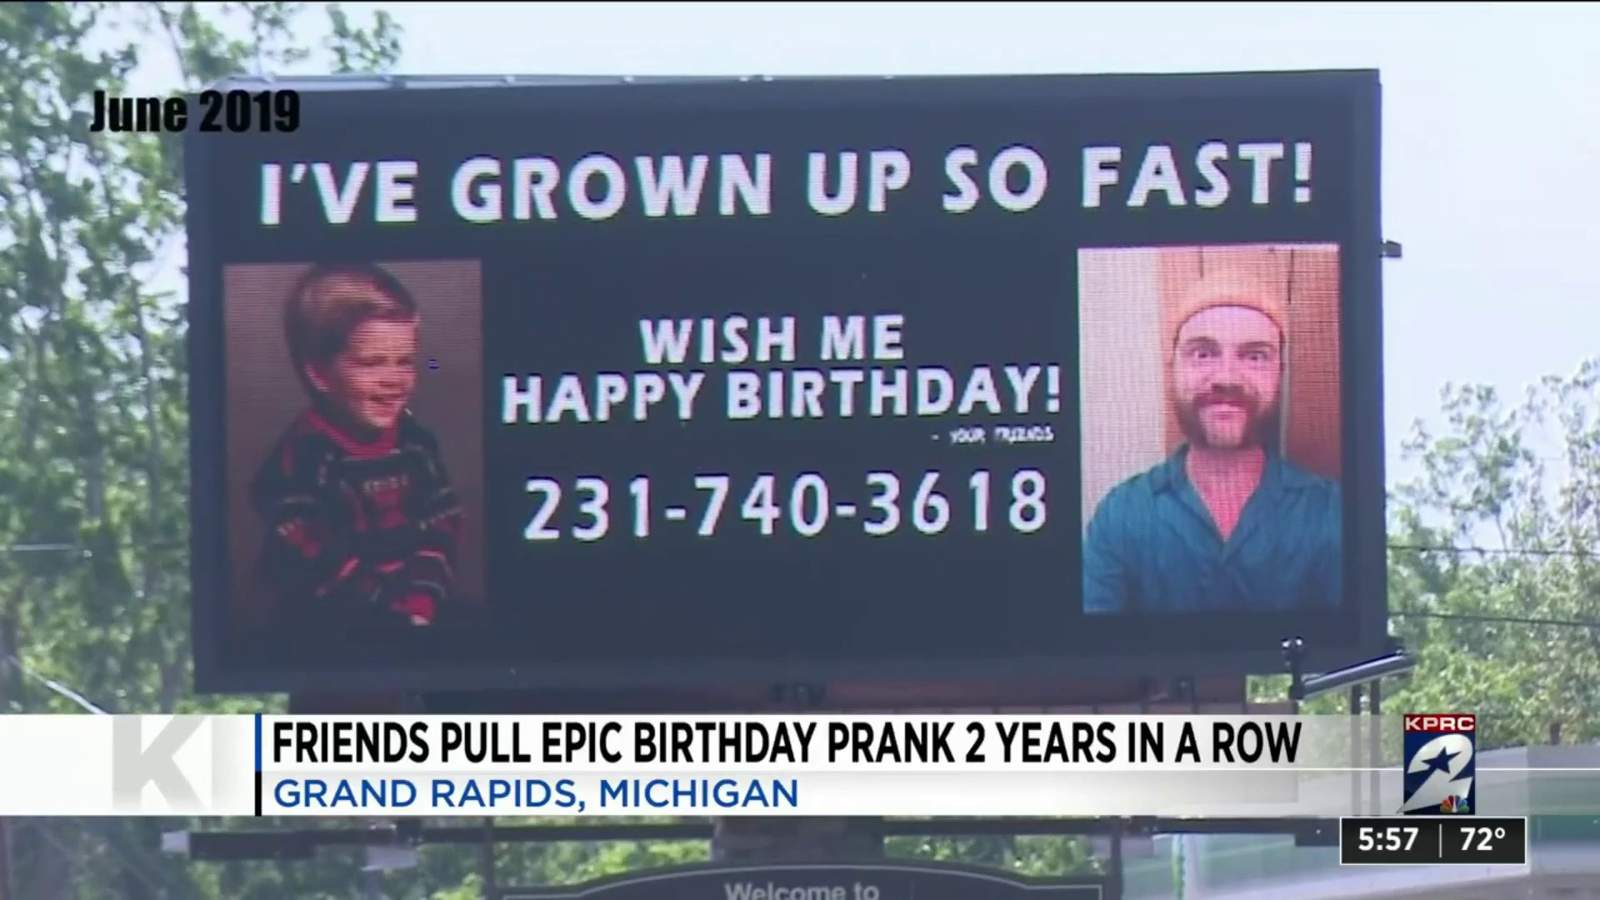 One Good Thing: Michigan man pranked for 2nd year in a row on his birthday